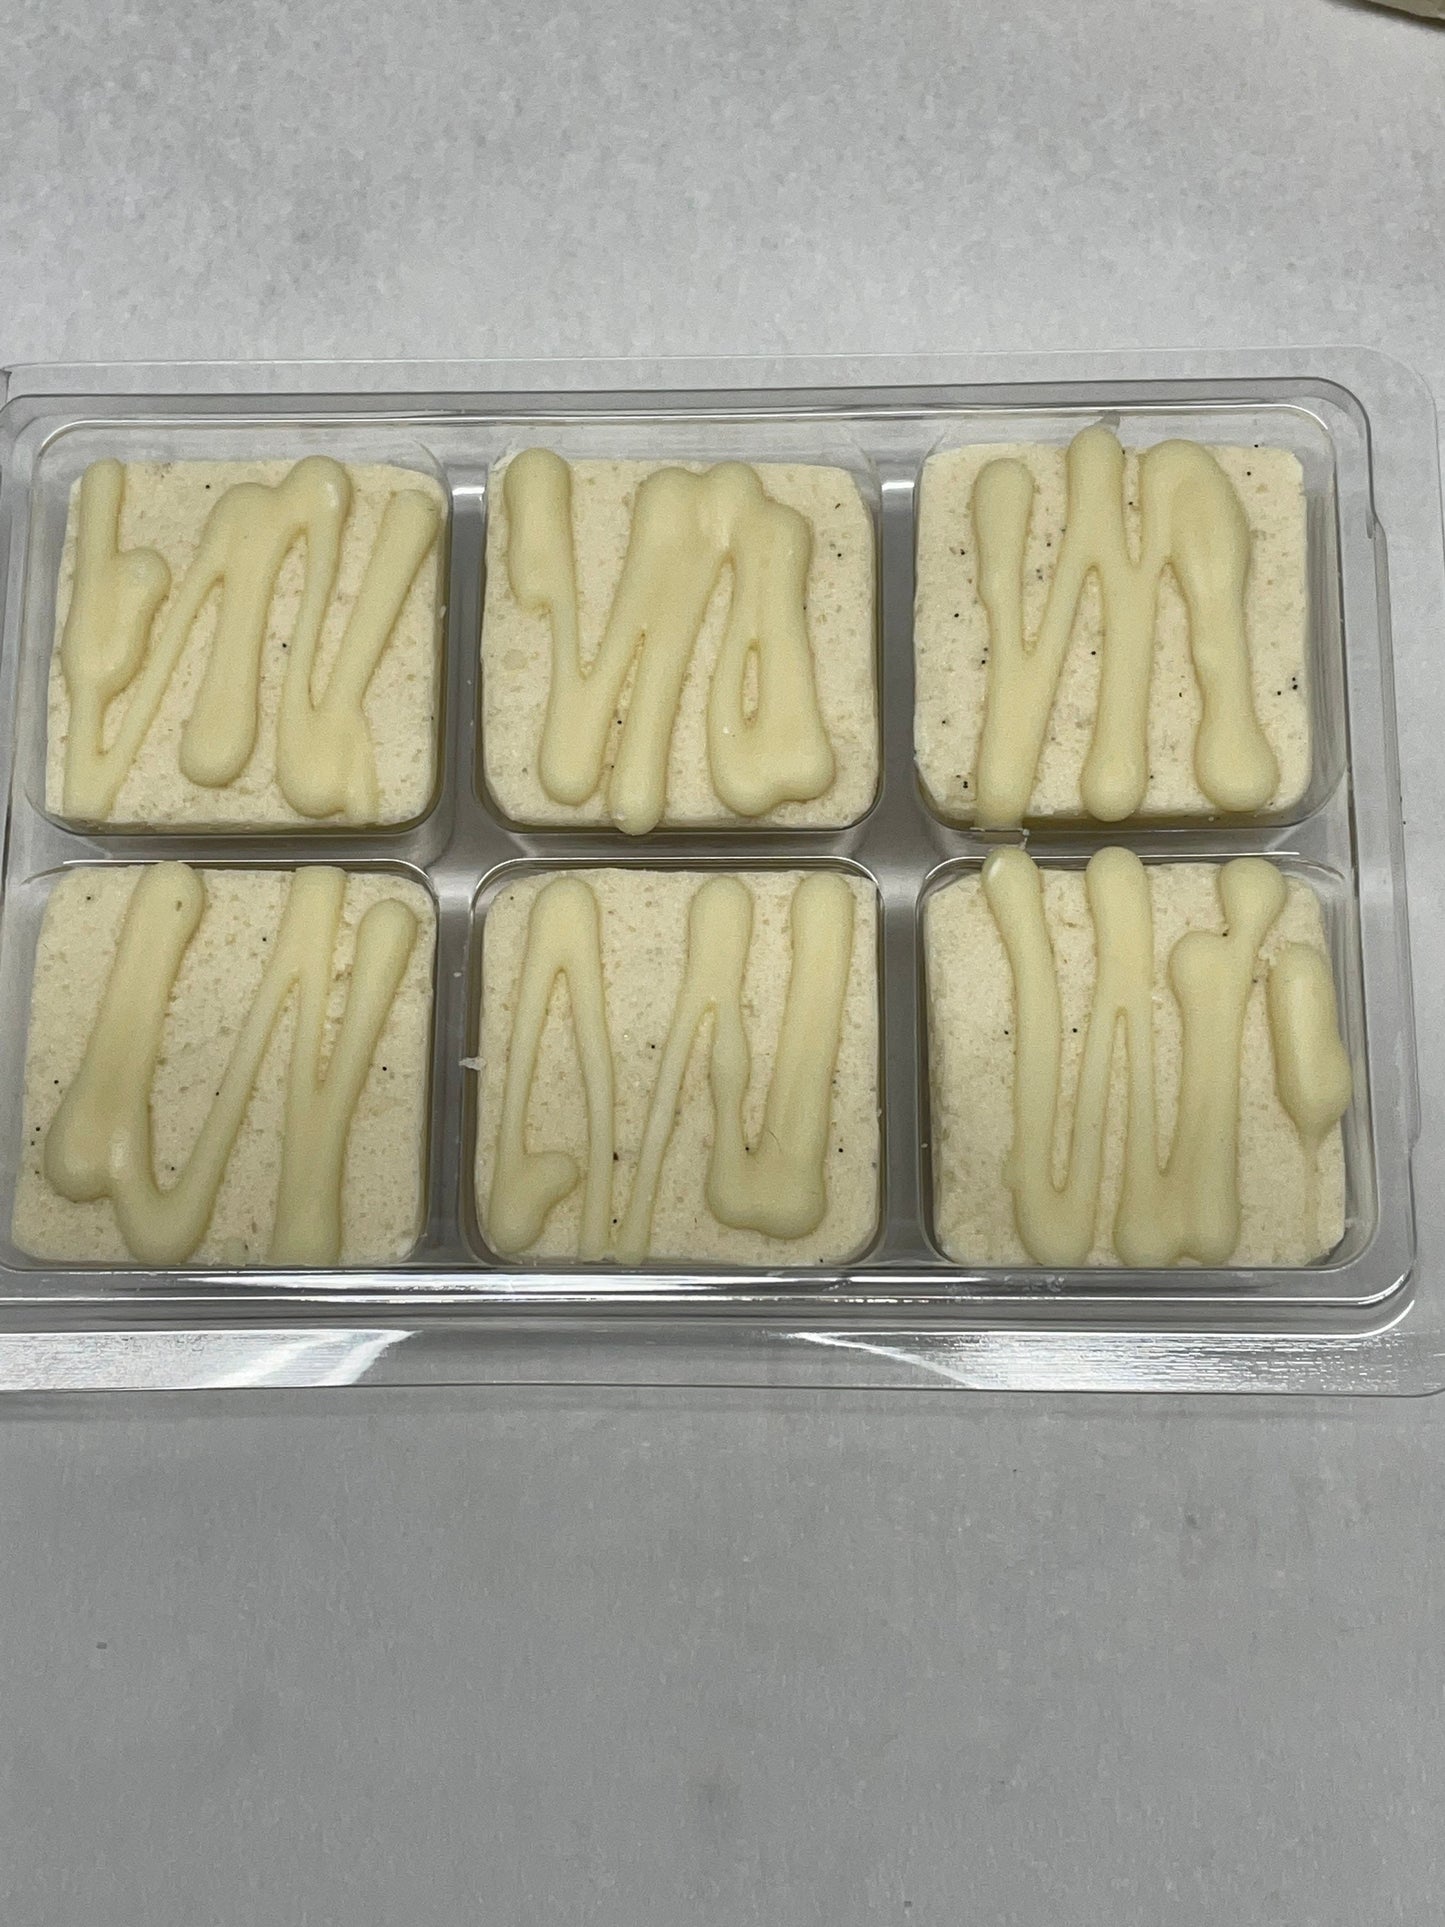 A photo of a six pack of Vanilla Shower Bubble Scrub Body Bars